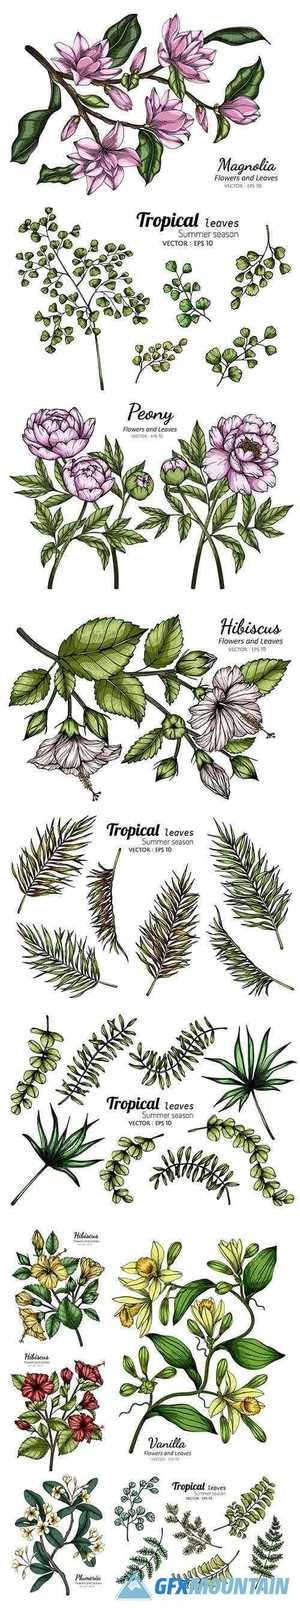 Tropical and other Leaf Drawing Illustration